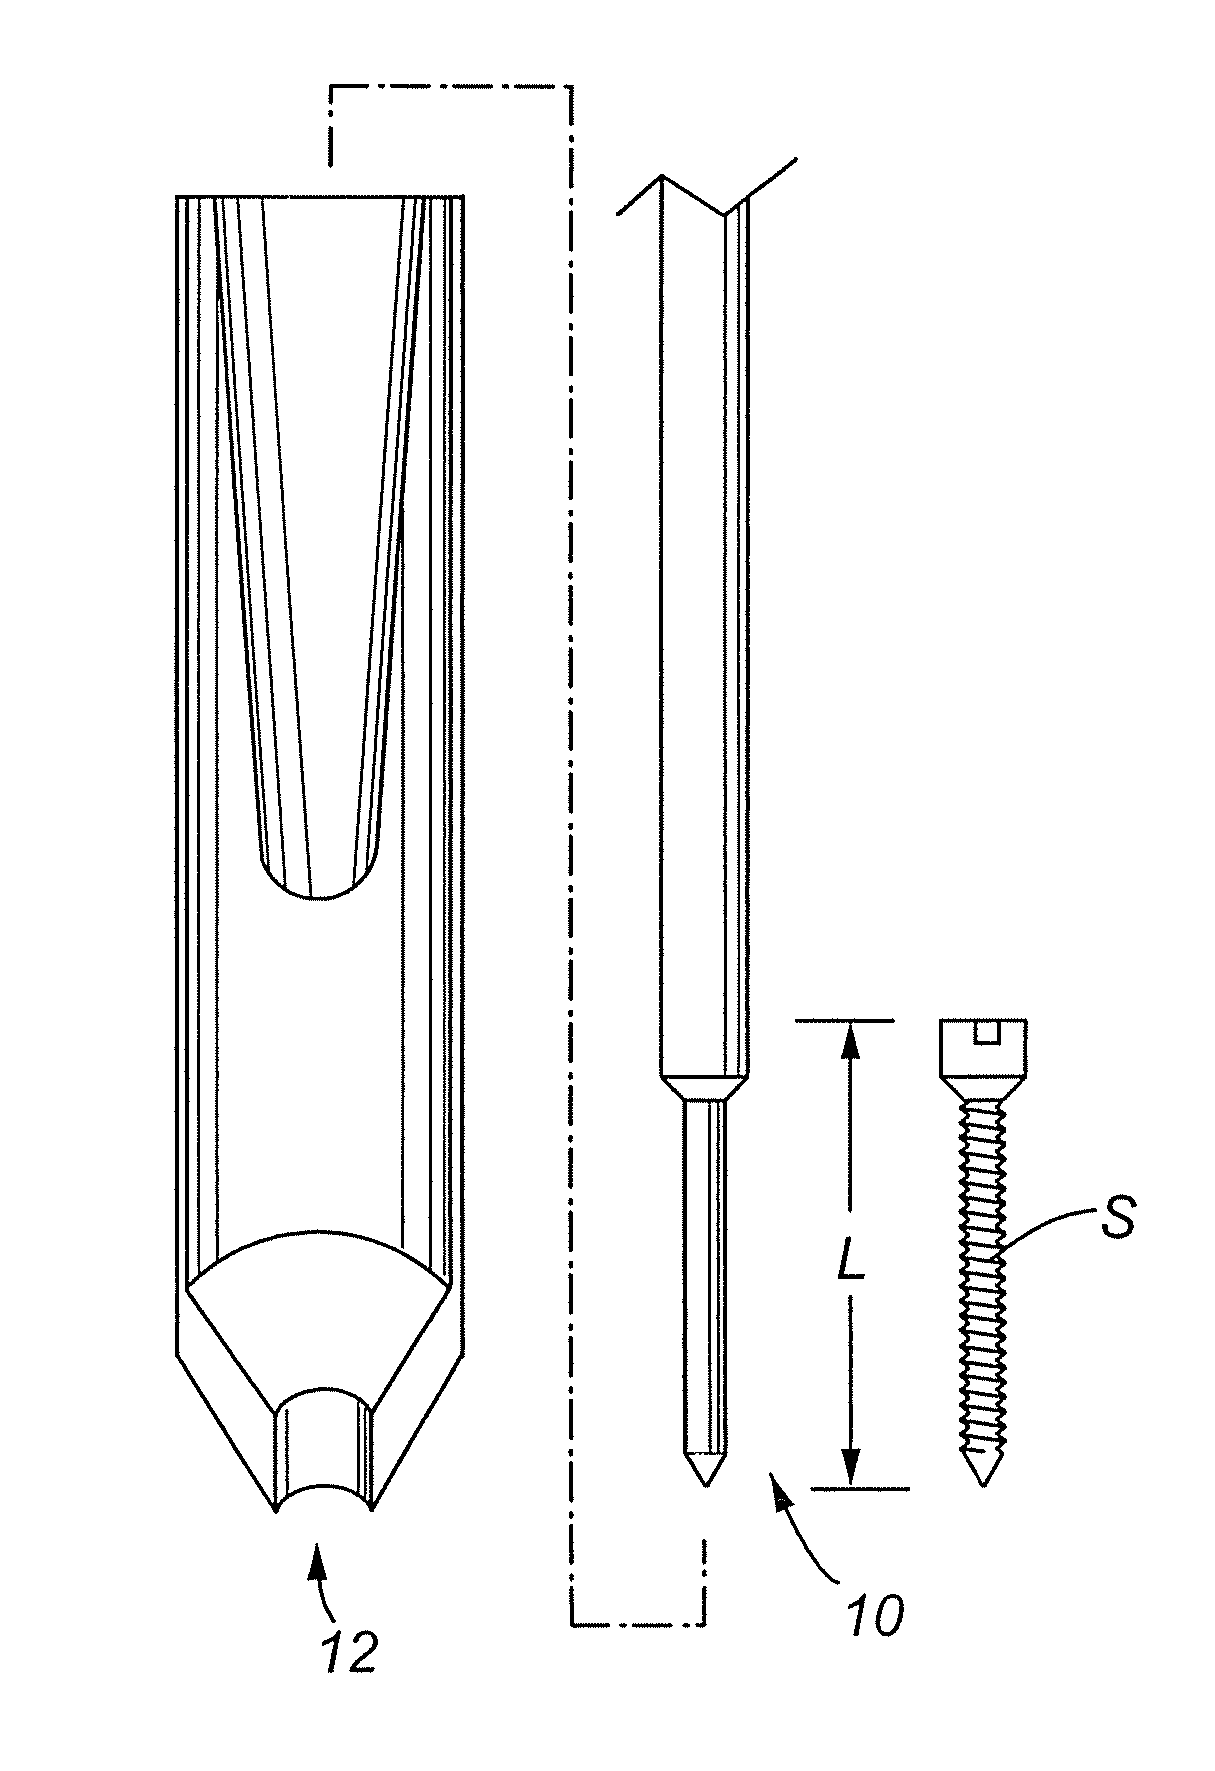 Pedicle seeker and retractor, and methods of use